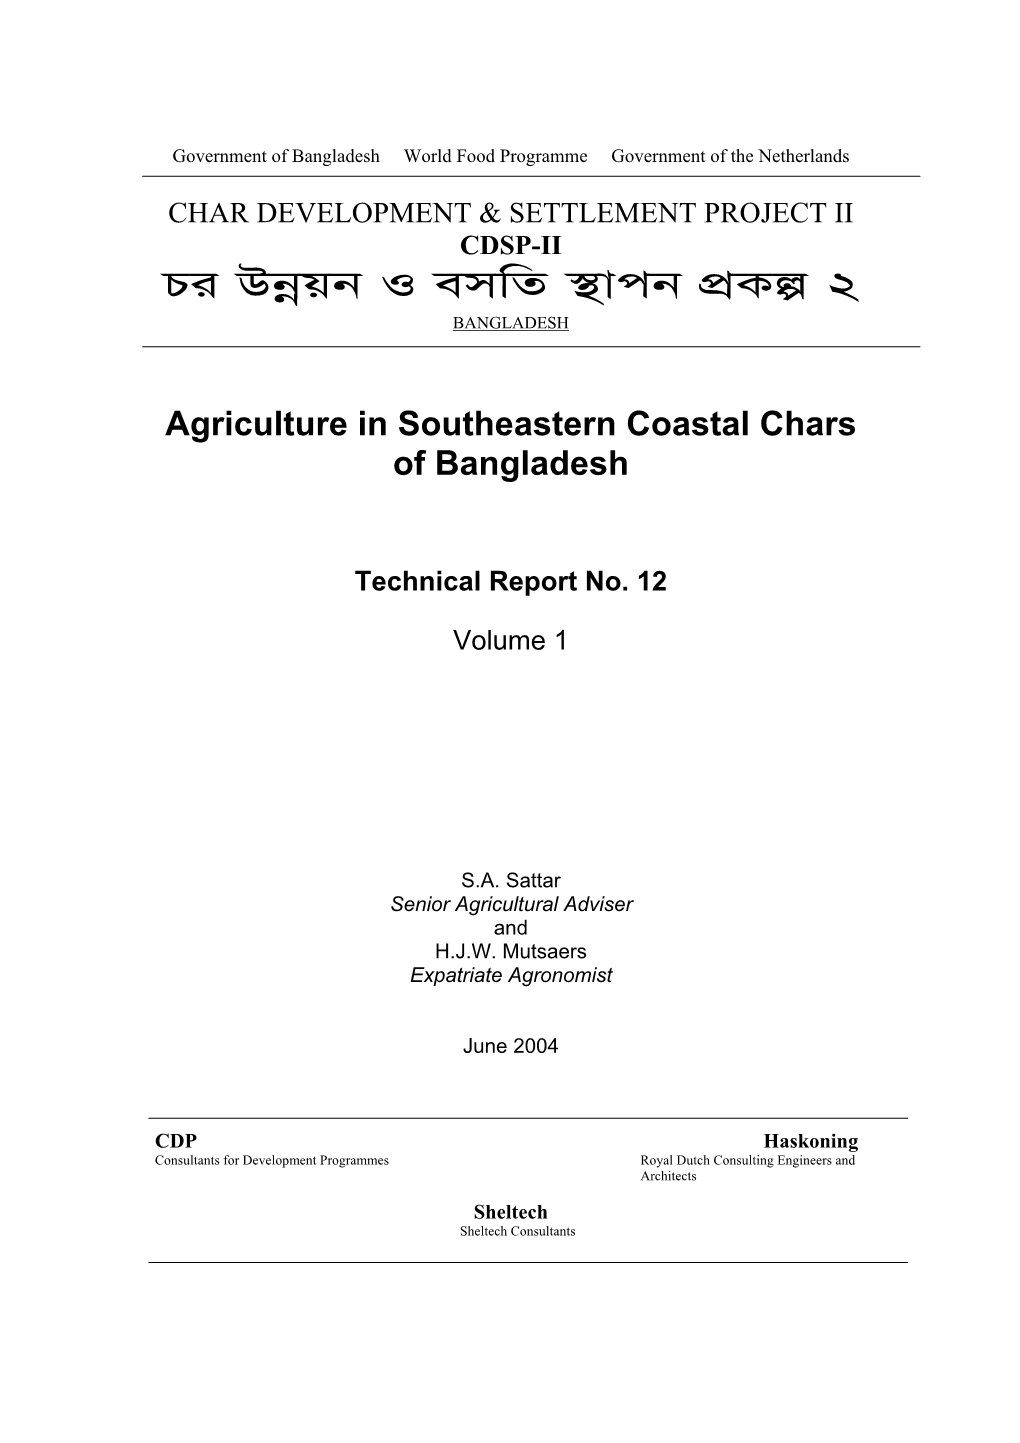 Agriculture in Accreted Coastal Areas